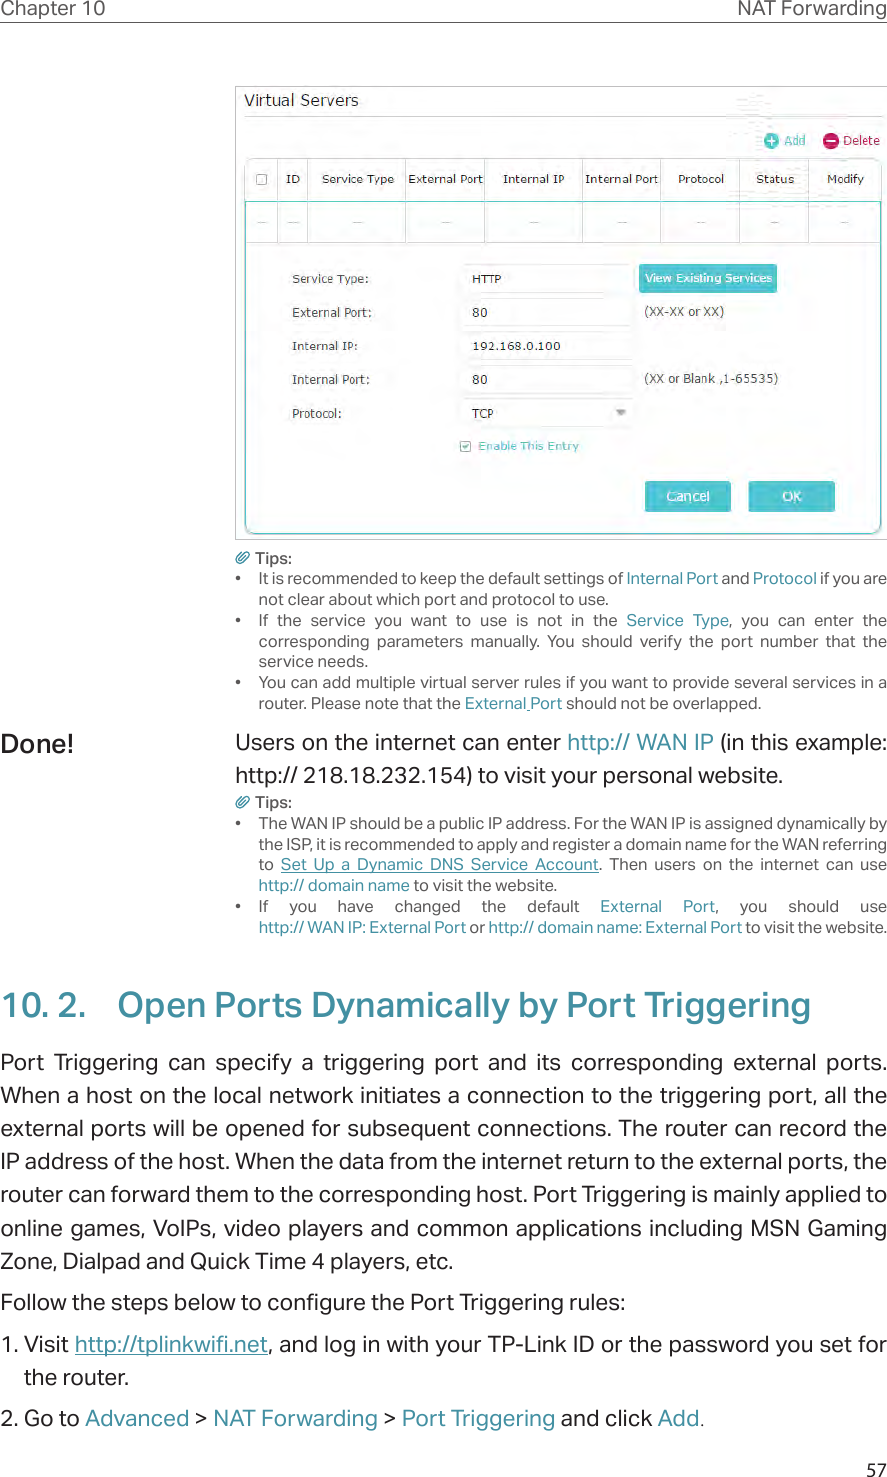 57Chapter 10 NAT ForwardingTips:•  It is recommended to keep the default settings of Internal Port and Protocol if you are not clear about which port and protocol to use.•  If the service you want to use is not in the Service Type, you can enter the corresponding parameters manually. You should verify the port number that the service needs.•  You can add multiple virtual server rules if you want to provide several services in a router. Please note that the External Port should not be overlapped.Users on the internet can enter http:// WAN IP (in this example: http:// 218.18.232.154) to visit your personal website.Tips:•  The WAN IP should be a public IP address. For the WAN IP is assigned dynamically by the ISP, it is recommended to apply and register a domain name for the WAN referring to  Set Up a Dynamic DNS Service Account. Then users on the internet can use  http:// domain name to visit the website.• If you have changed the default External Port, you should use  http:// WAN IP: External Port or http:// domain name: External Port to visit the website.10. 2.  Open Ports Dynamically by Port TriggeringPort Triggering can specify a triggering port and its corresponding external ports. When a host on the local network initiates a connection to the triggering port, all the external ports will be opened for subsequent connections. The router can record the IP address of the host. When the data from the internet return to the external ports, the router can forward them to the corresponding host. Port Triggering is mainly applied to online games, VoIPs, video players and common applications including MSN Gaming Zone, Dialpad and Quick Time 4 players, etc. Follow the steps below to configure the Port Triggering rules:1. Visit http://tplinkwifi.net, and log in with your TP-Link ID or the password you set for the router.2. Go to Advanced &gt; NAT Forwarding &gt; Port Triggering and click Add.Done!